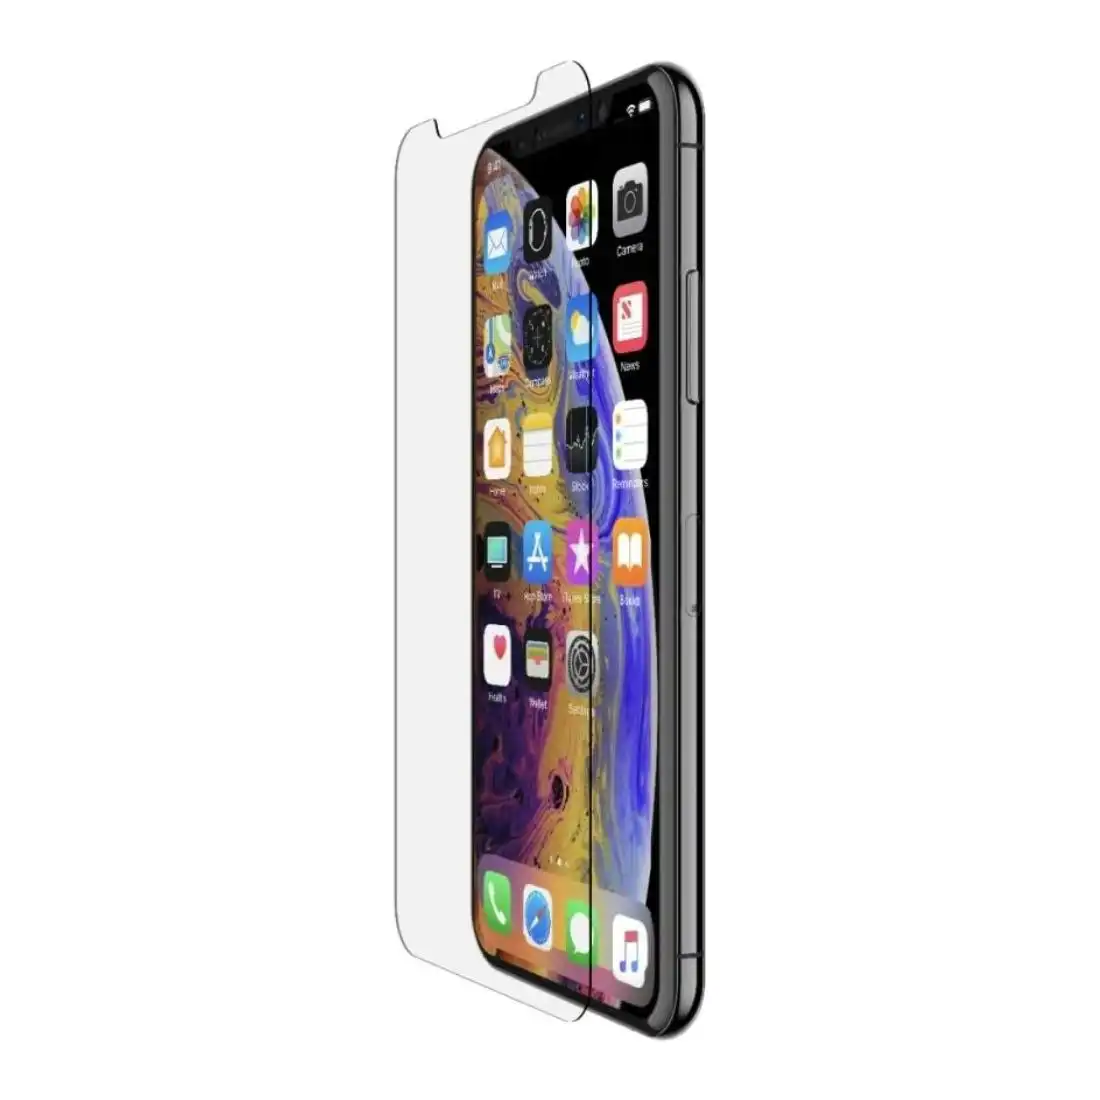 Belkin ScreenForce Tempered Glass Screen Protector for iPhone XS Max